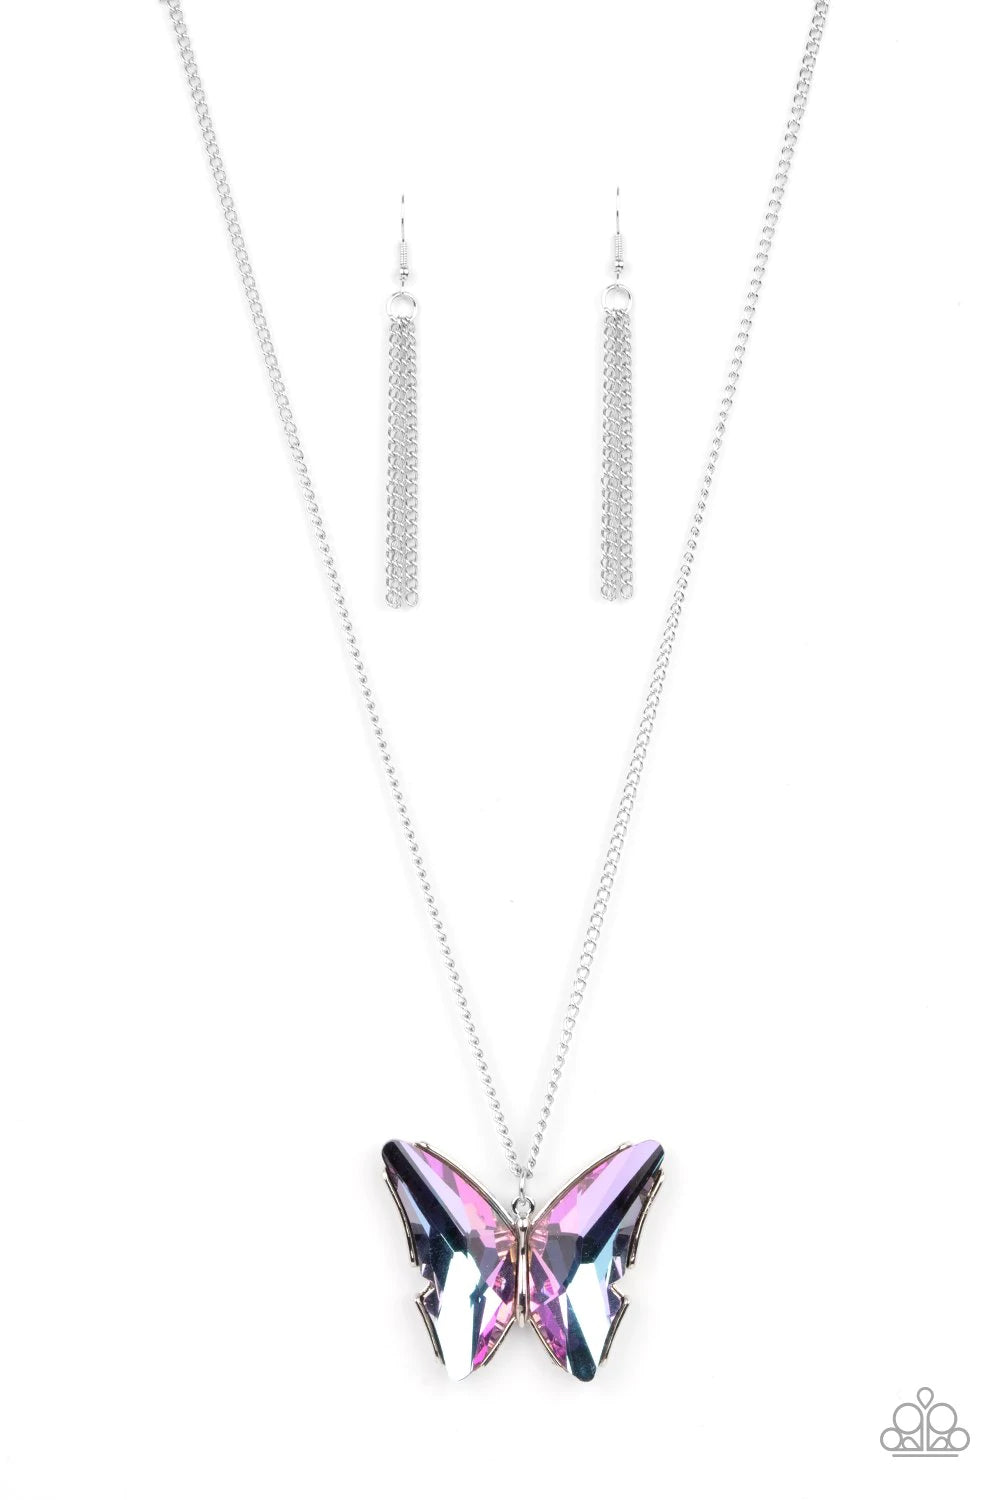 Paparazzi Accessories The Social Butterfly Effect - Purple Necklace & Earrings 